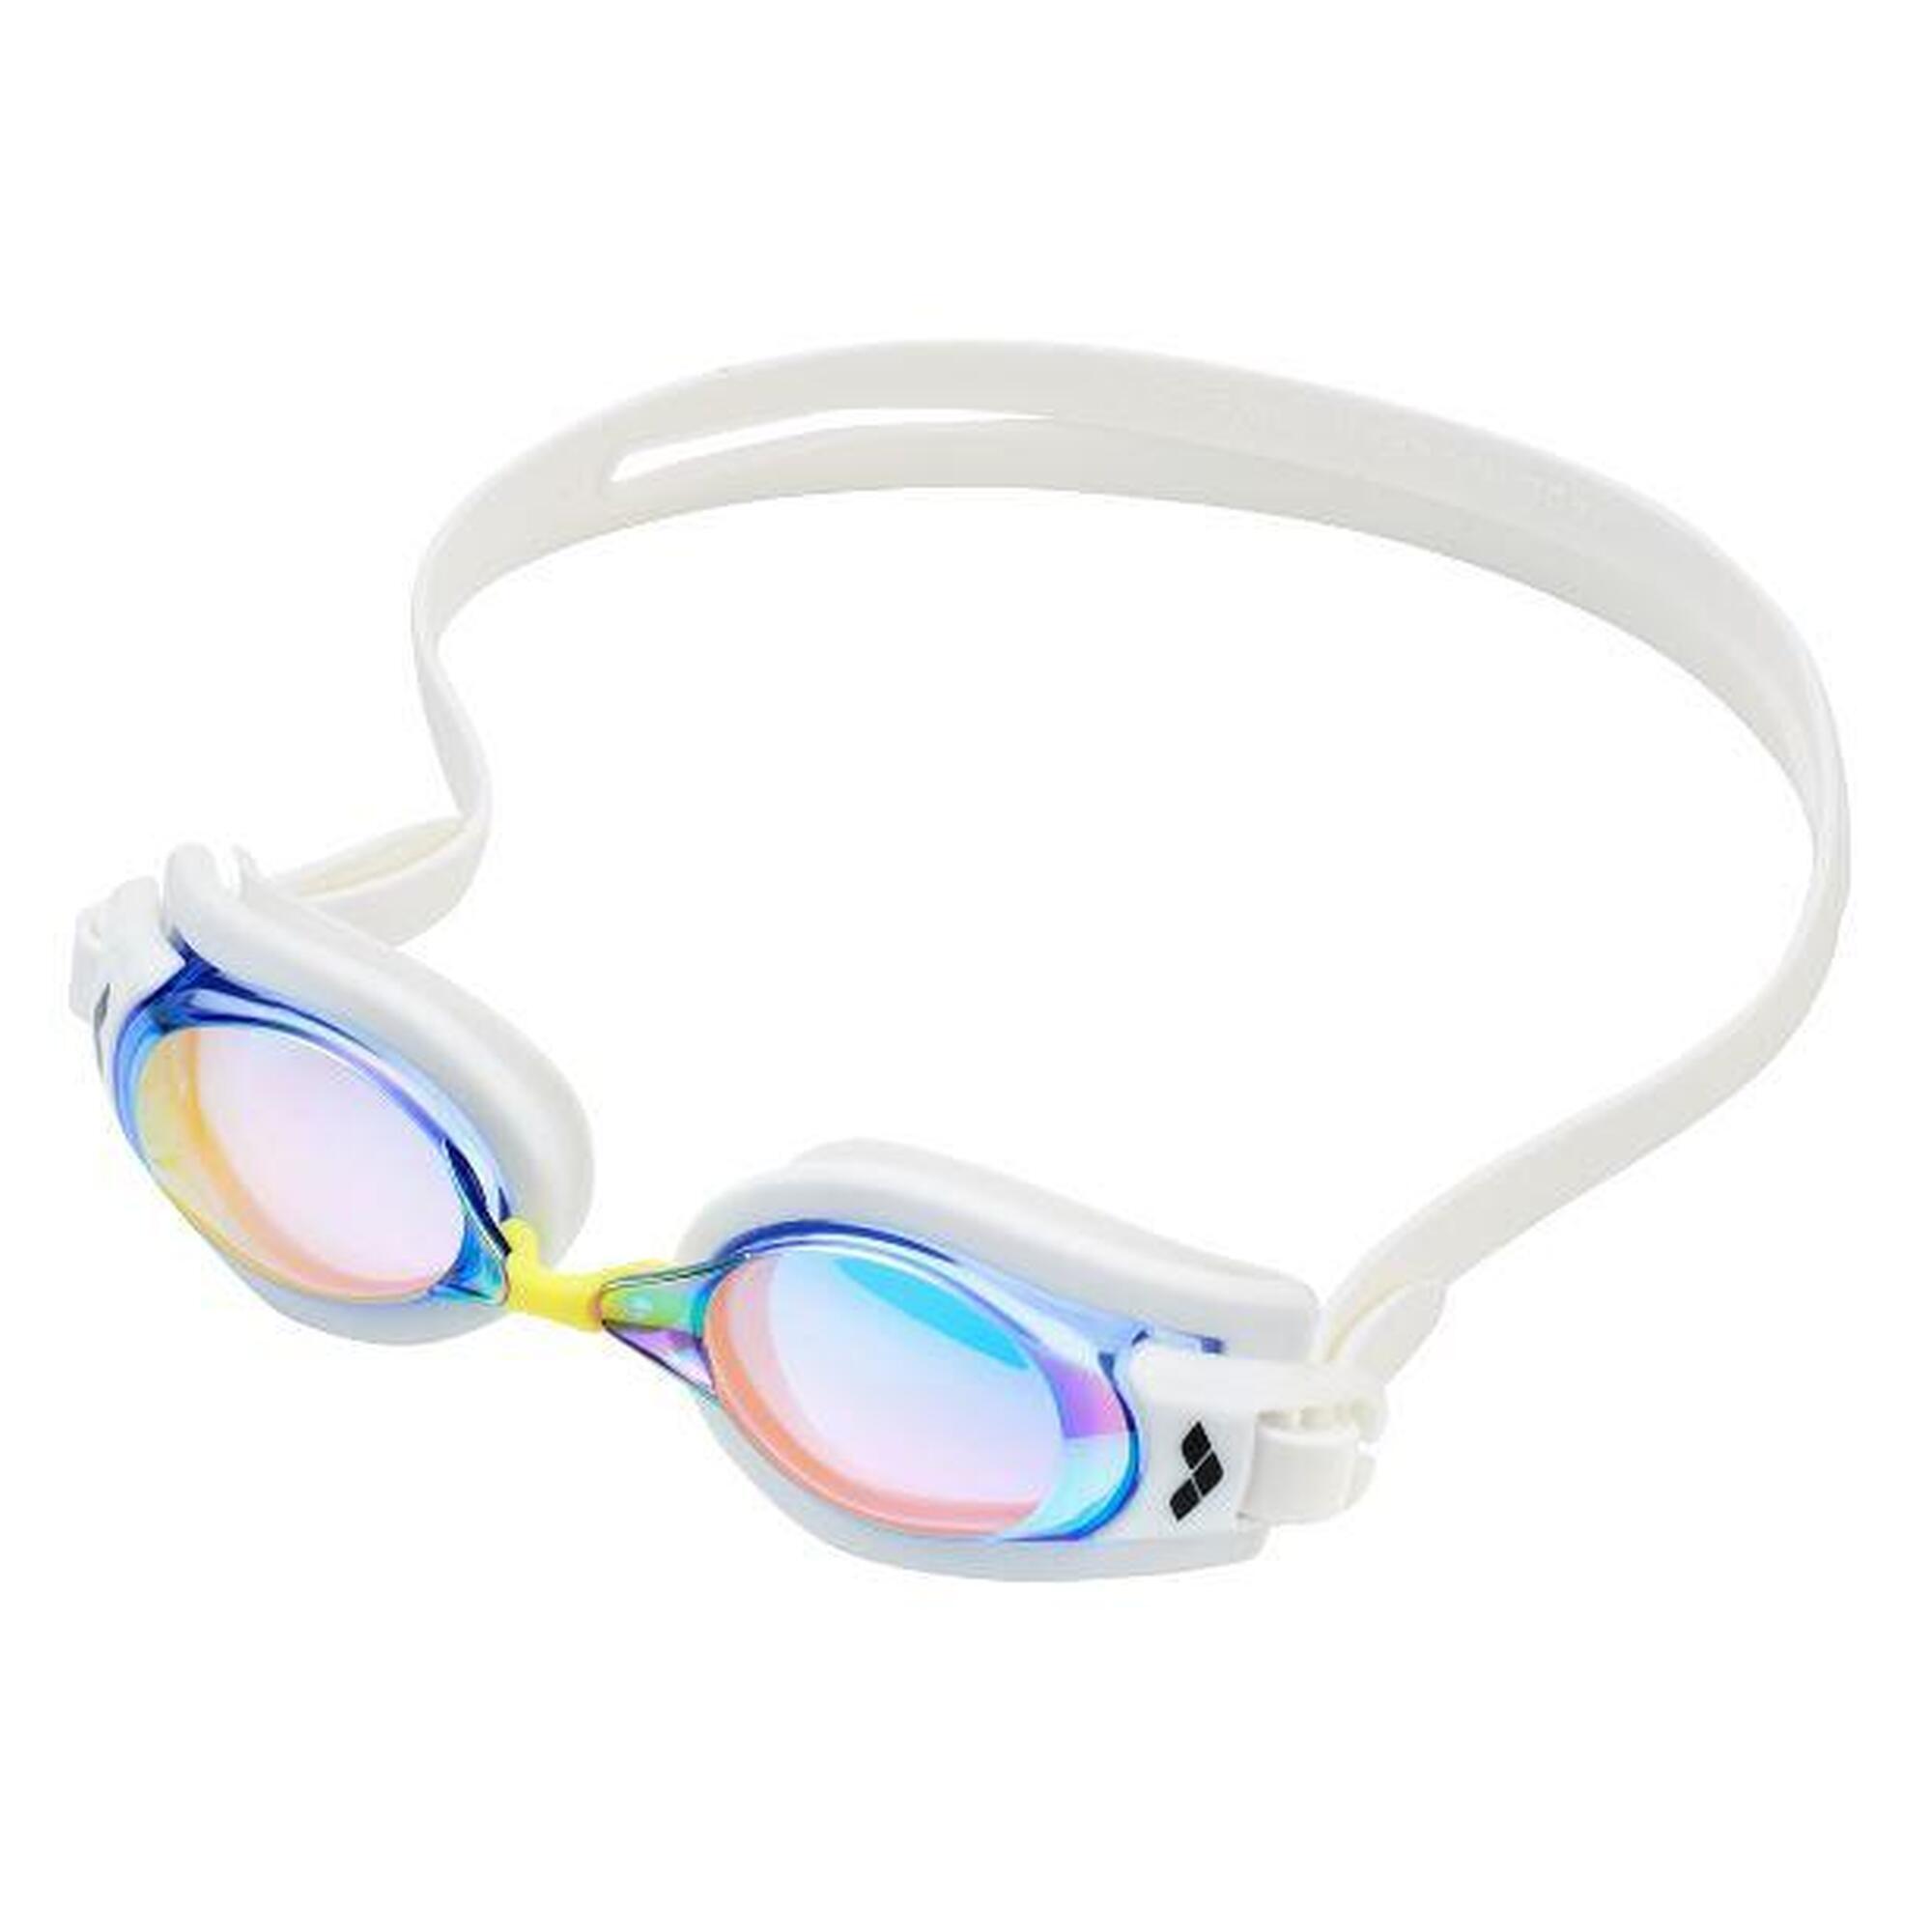 JAPAN MADE RE:NON 200 DIOPTERS OPTICAL MIRROR GOGGLE - WHITE